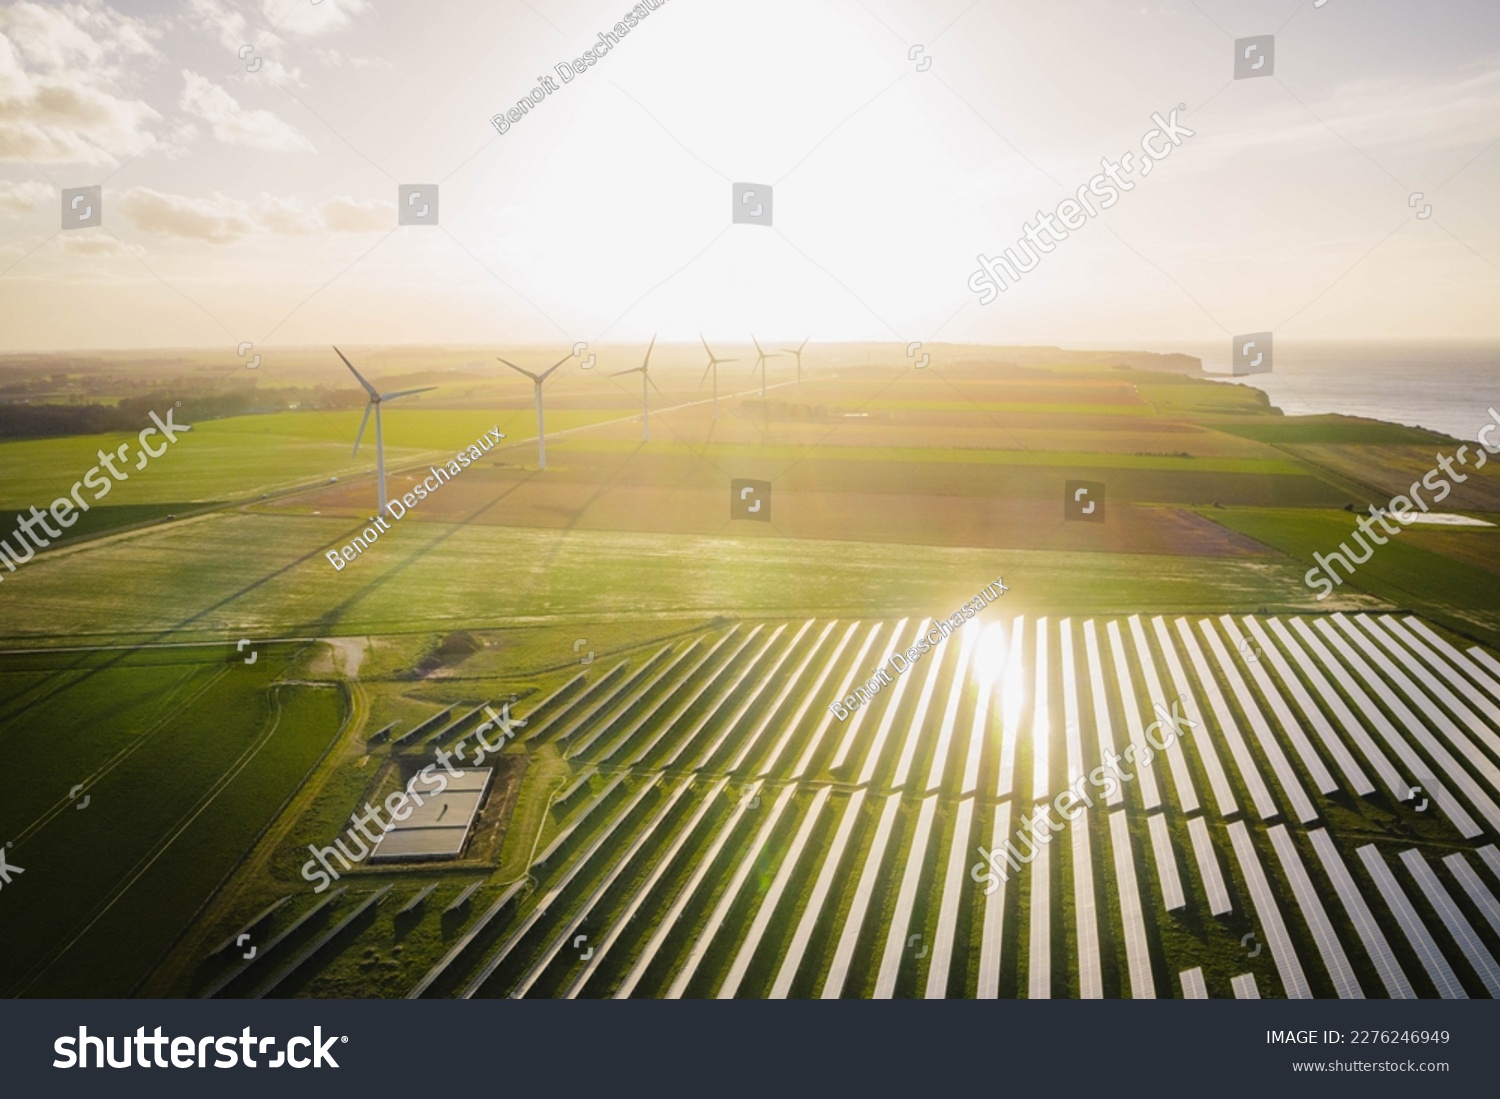 Windmills and solar panels farm in green fields close to the ocean. Renewable energies concept. Green energy for carbon dioxide emission reduction.  #2276246949